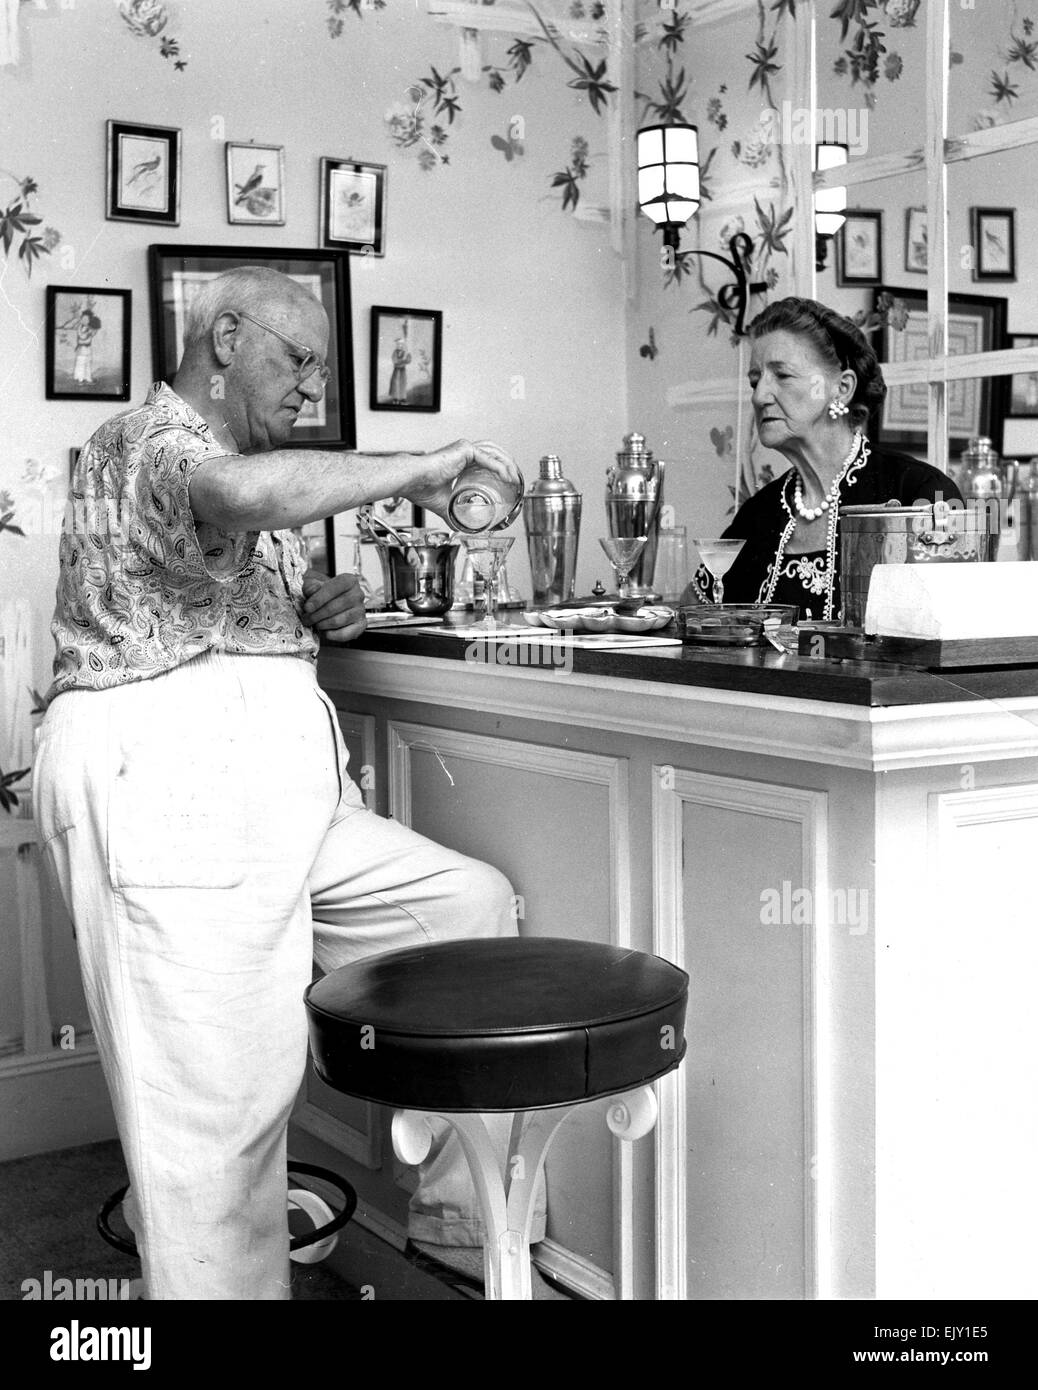 P.G.WODEHOUSE (1881-1975) English humourist with wife Ethel at their home in Basket Neck Lane, Remsenburg, New York, about 1956. Photo: Graphic House 6640J Stock Photo